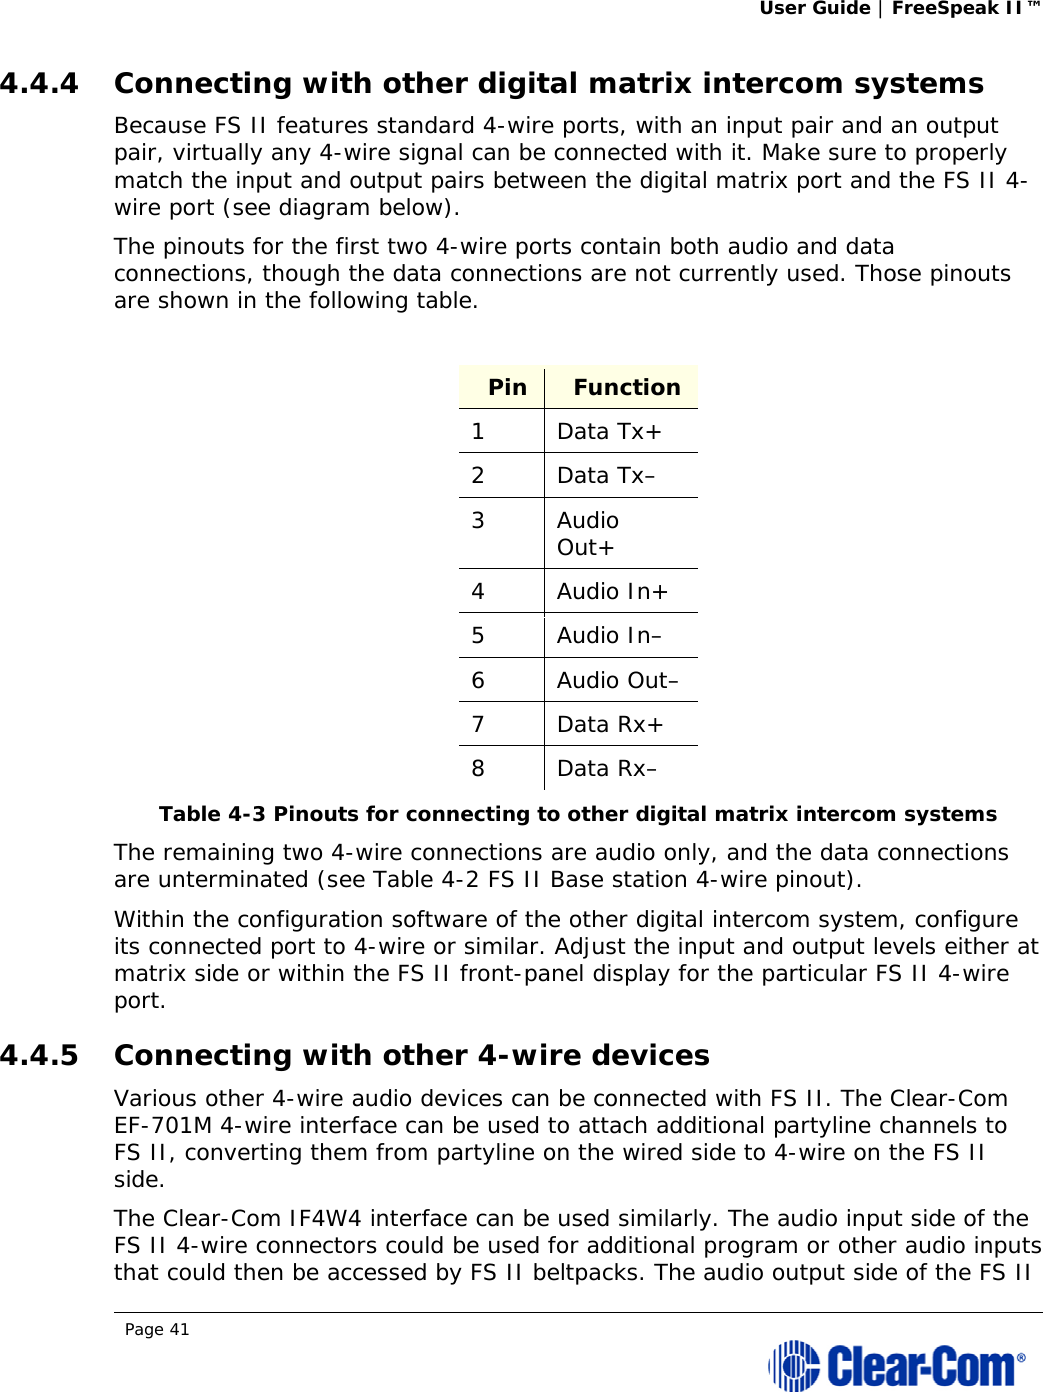 User Guide | FreeSpeak II™  Page 41  4.4.4 Connecting with other digital matrix intercom systems Because FS II features standard 4-wire ports, with an input pair and an output pair, virtually any 4-wire signal can be connected with it. Make sure to properly match the input and output pairs between the digital matrix port and the FS II 4-wire port (see diagram below). The pinouts for the first two 4-wire ports contain both audio and data connections, though the data connections are not currently used. Those pinouts are shown in the following table.  Pin  Function 1 Data Tx+ 2 Data Tx– 3 Audio Out+ 4 Audio In+ 5 Audio In– 6 Audio Out– 7 Data Rx+ 8 Data Rx– Table 4-3 Pinouts for connecting to other digital matrix intercom systems  The remaining two 4-wire connections are audio only, and the data connections are unterminated (see Table 4-2 FS II Base station 4-wire pinout). Within the configuration software of the other digital intercom system, configure its connected port to 4-wire or similar. Adjust the input and output levels either at matrix side or within the FS II front-panel display for the particular FS II 4-wire port. 4.4.5 Connecting with other 4-wire devices Various other 4-wire audio devices can be connected with FS II. The Clear-Com EF-701M 4-wire interface can be used to attach additional partyline channels to FS II, converting them from partyline on the wired side to 4-wire on the FS II side.  The Clear-Com IF4W4 interface can be used similarly. The audio input side of the FS II 4-wire connectors could be used for additional program or other audio inputs that could then be accessed by FS II beltpacks. The audio output side of the FS II 